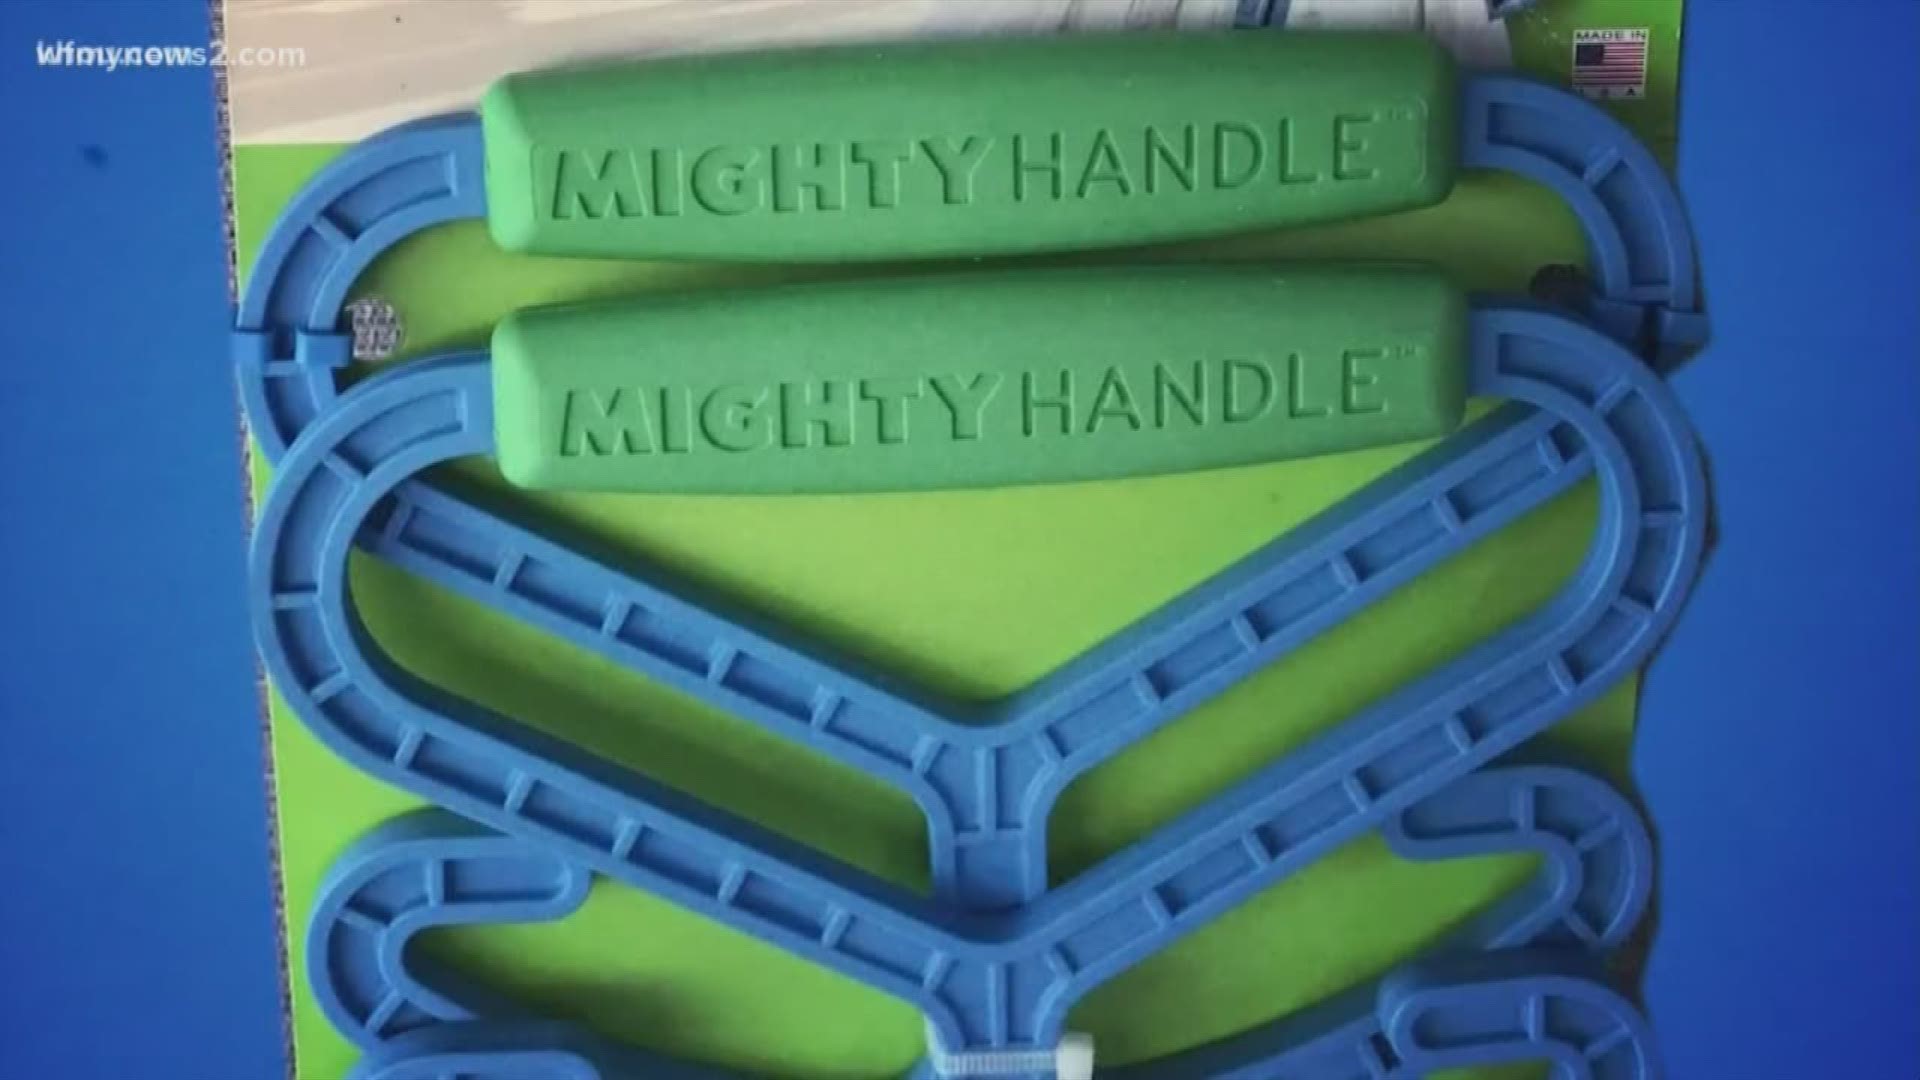 Hauling groceries is never fun, and many of us try to carry all of them at one time. The ‘Mighty Handle’ claims it will help you carry more with less strain.